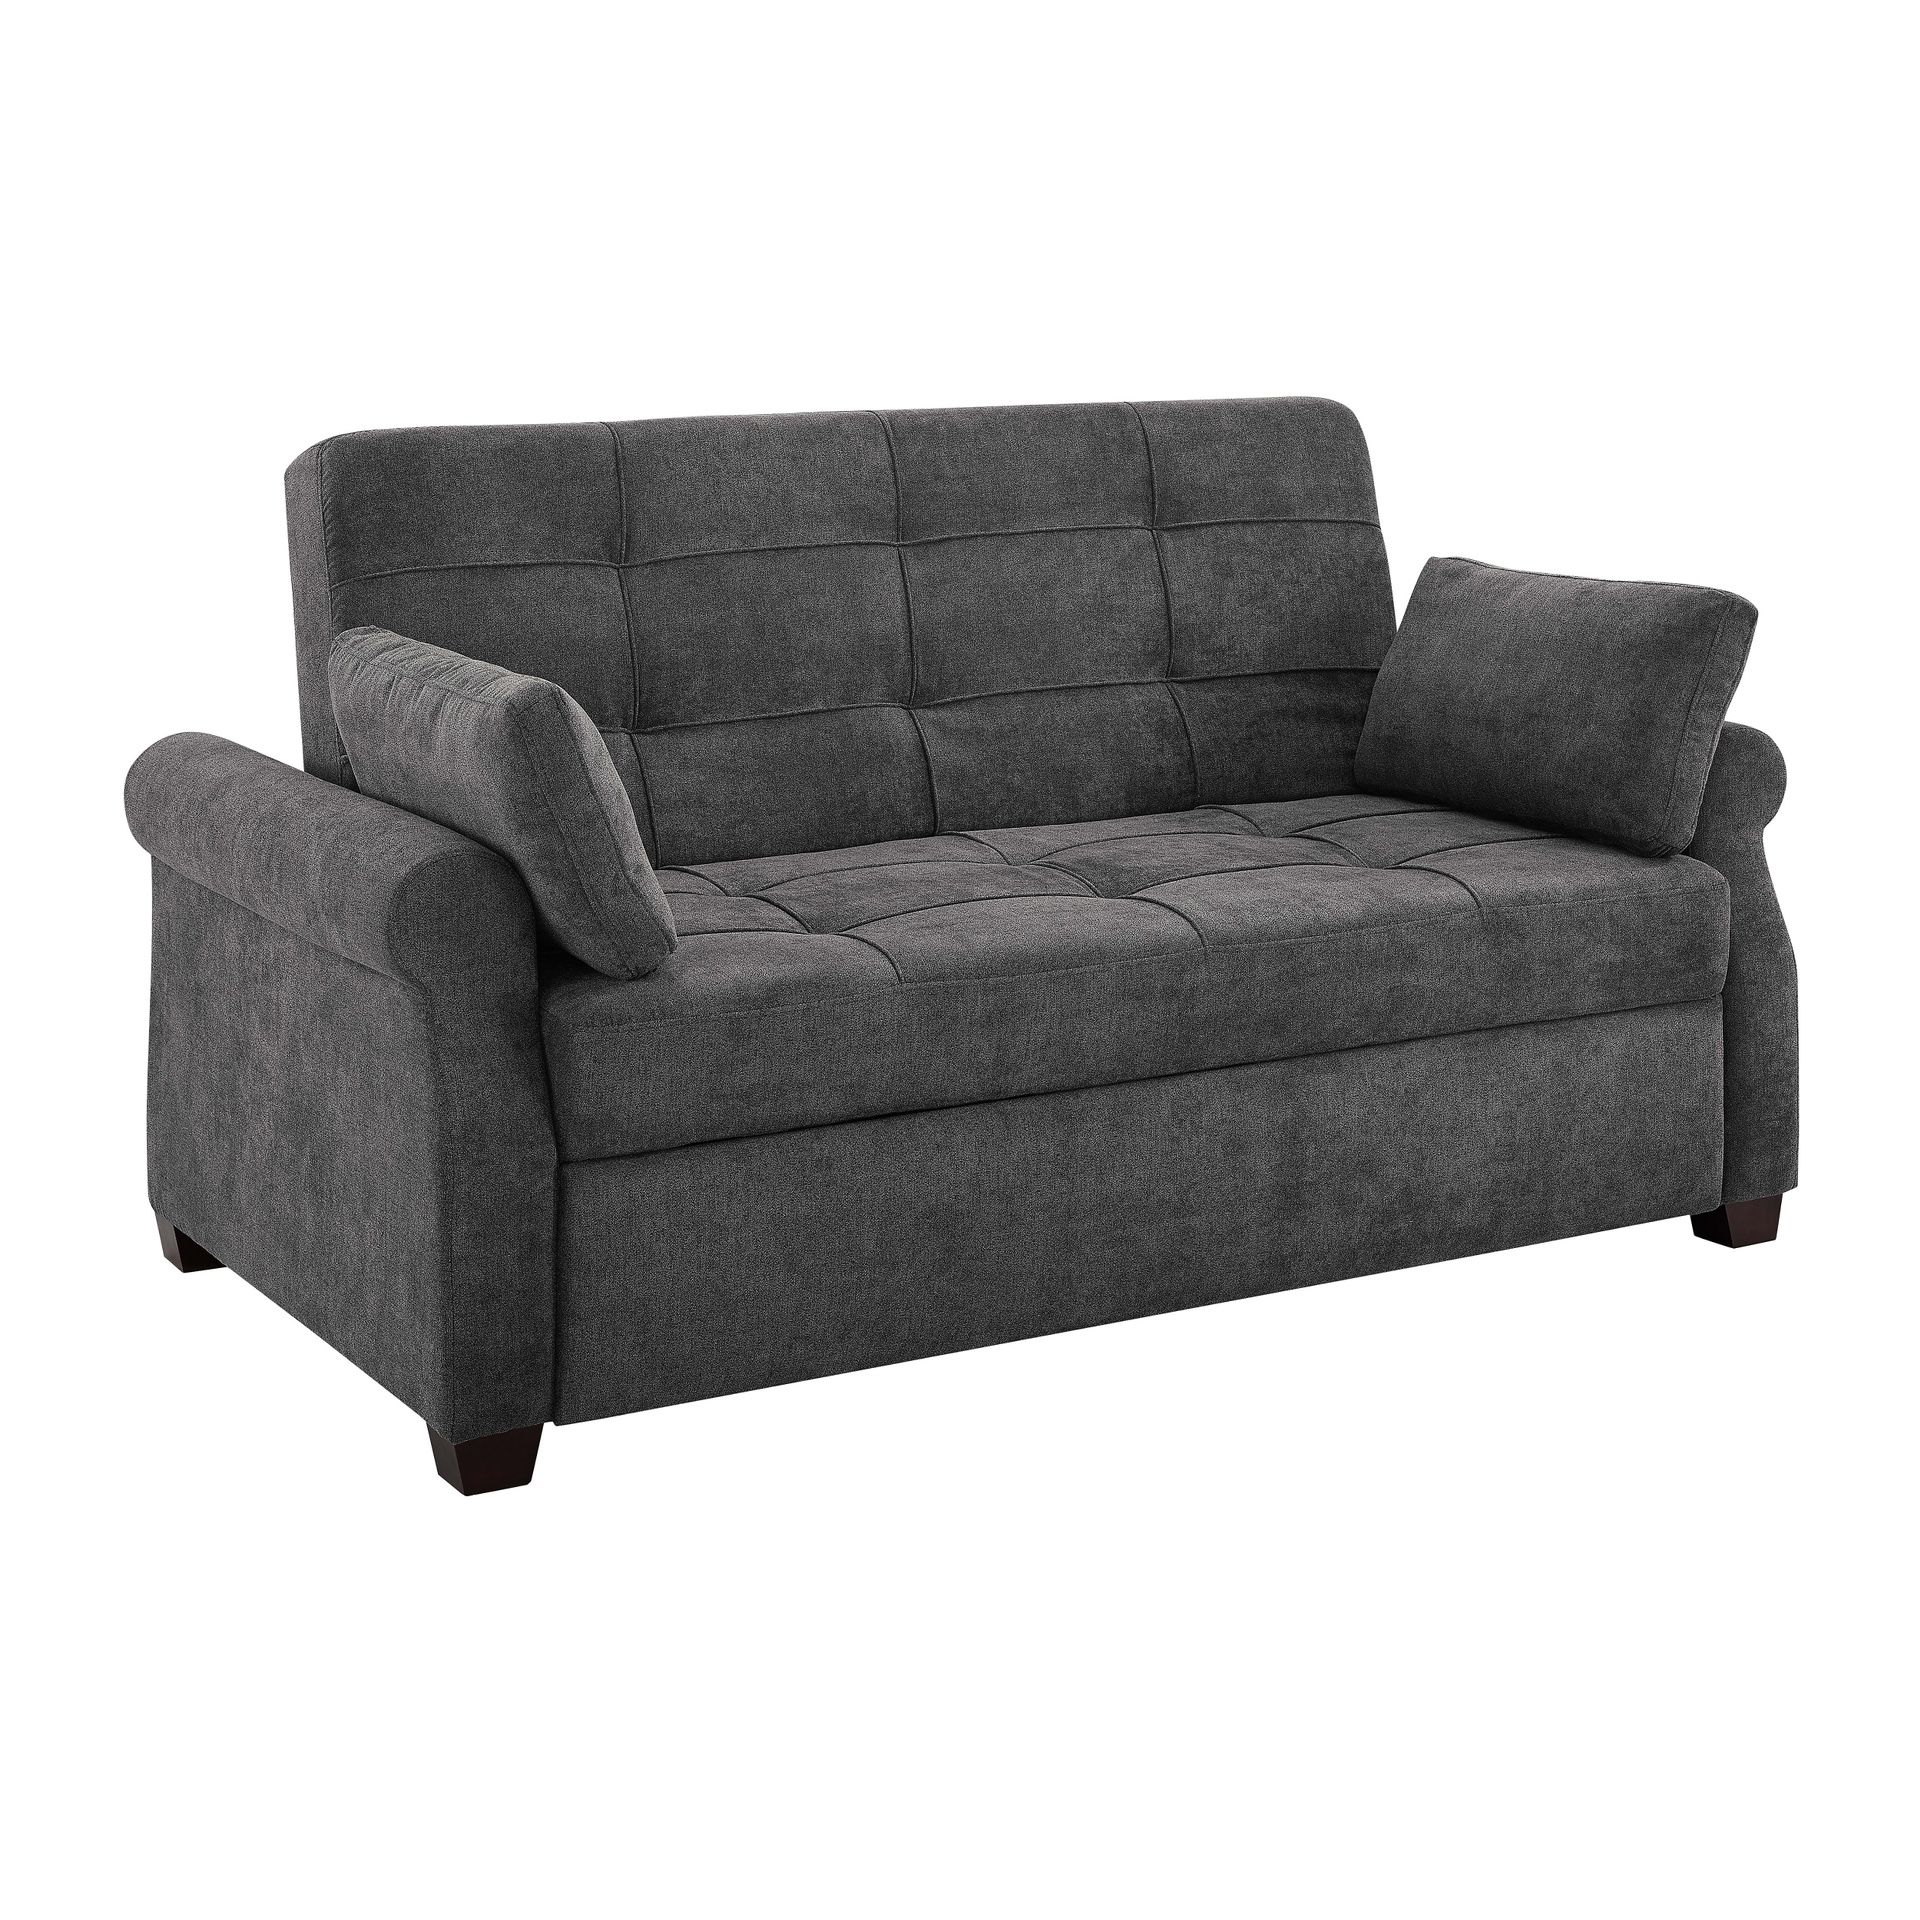 Sofa Bed Couch Serta Henley